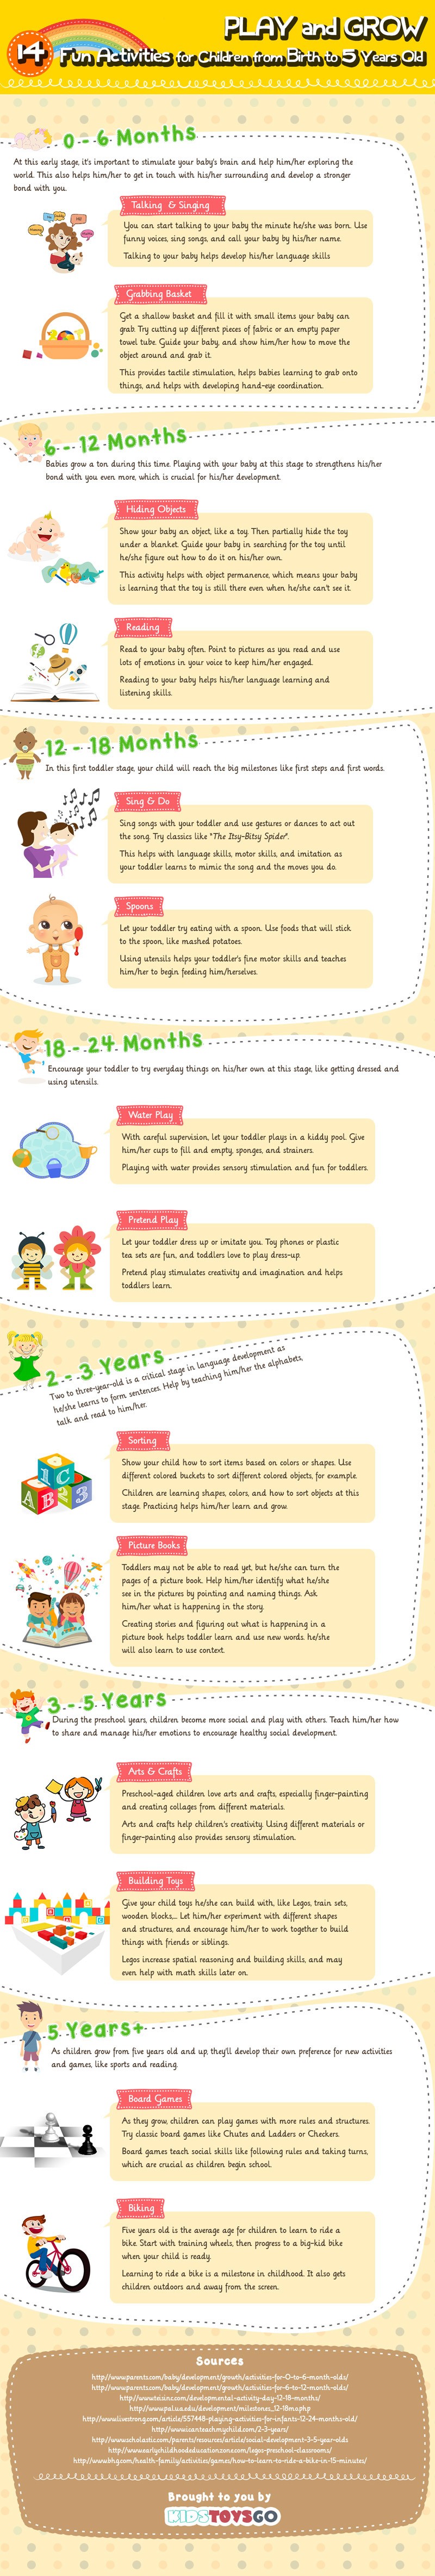 14 Great Activities for Your Children from Birth to 5 Year Old Infographic